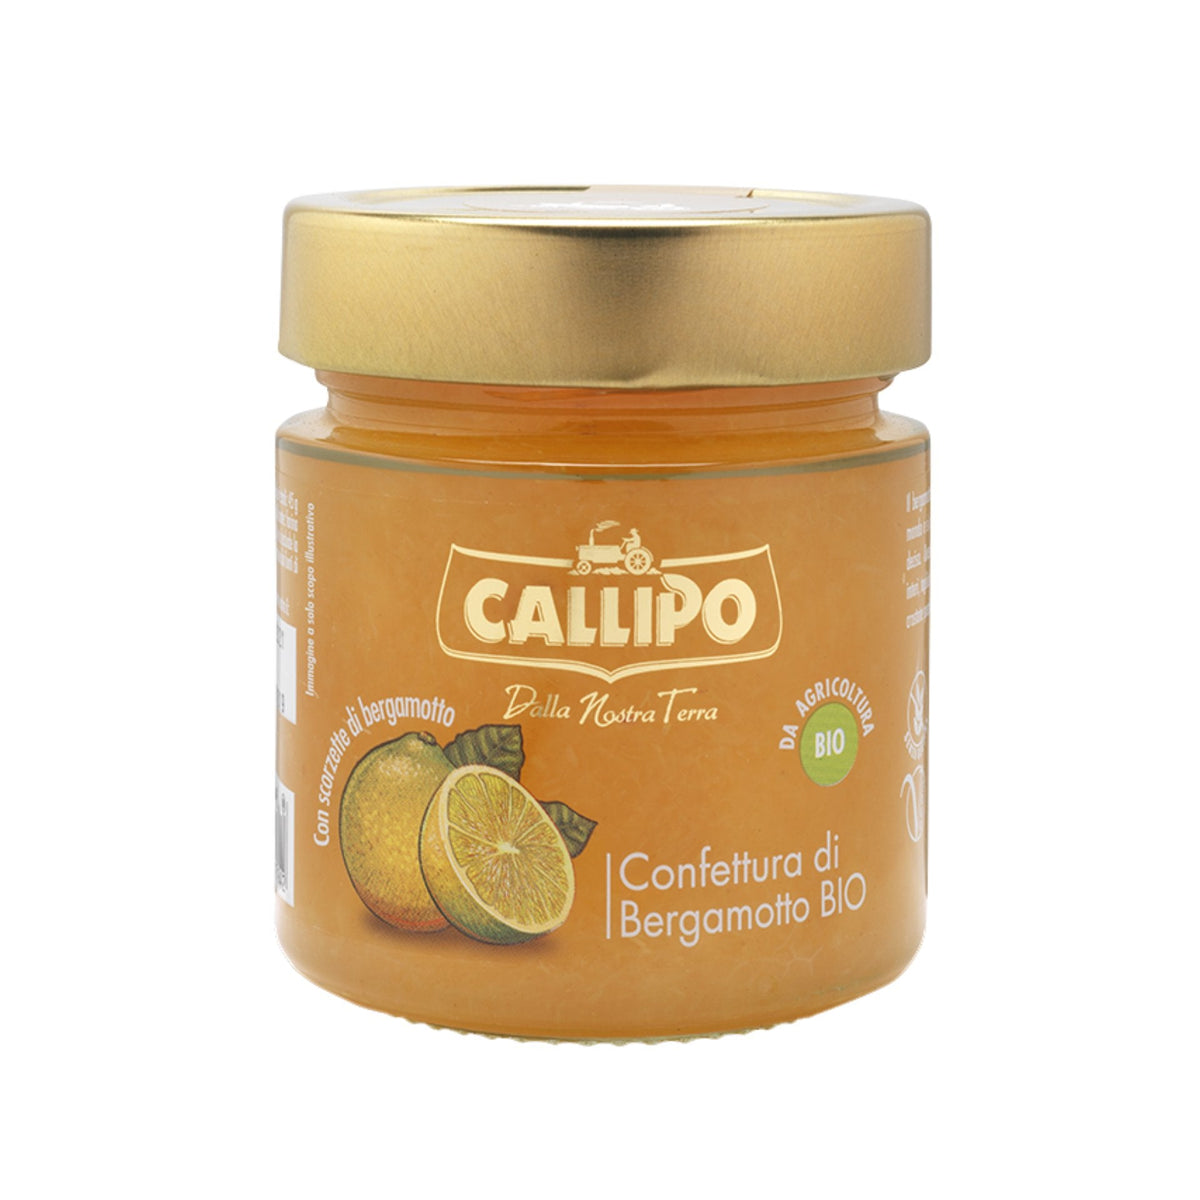 Callipo Organic Bergamot Jam 280g  | Imported and distributed in the UK by Just Gourmet Foods